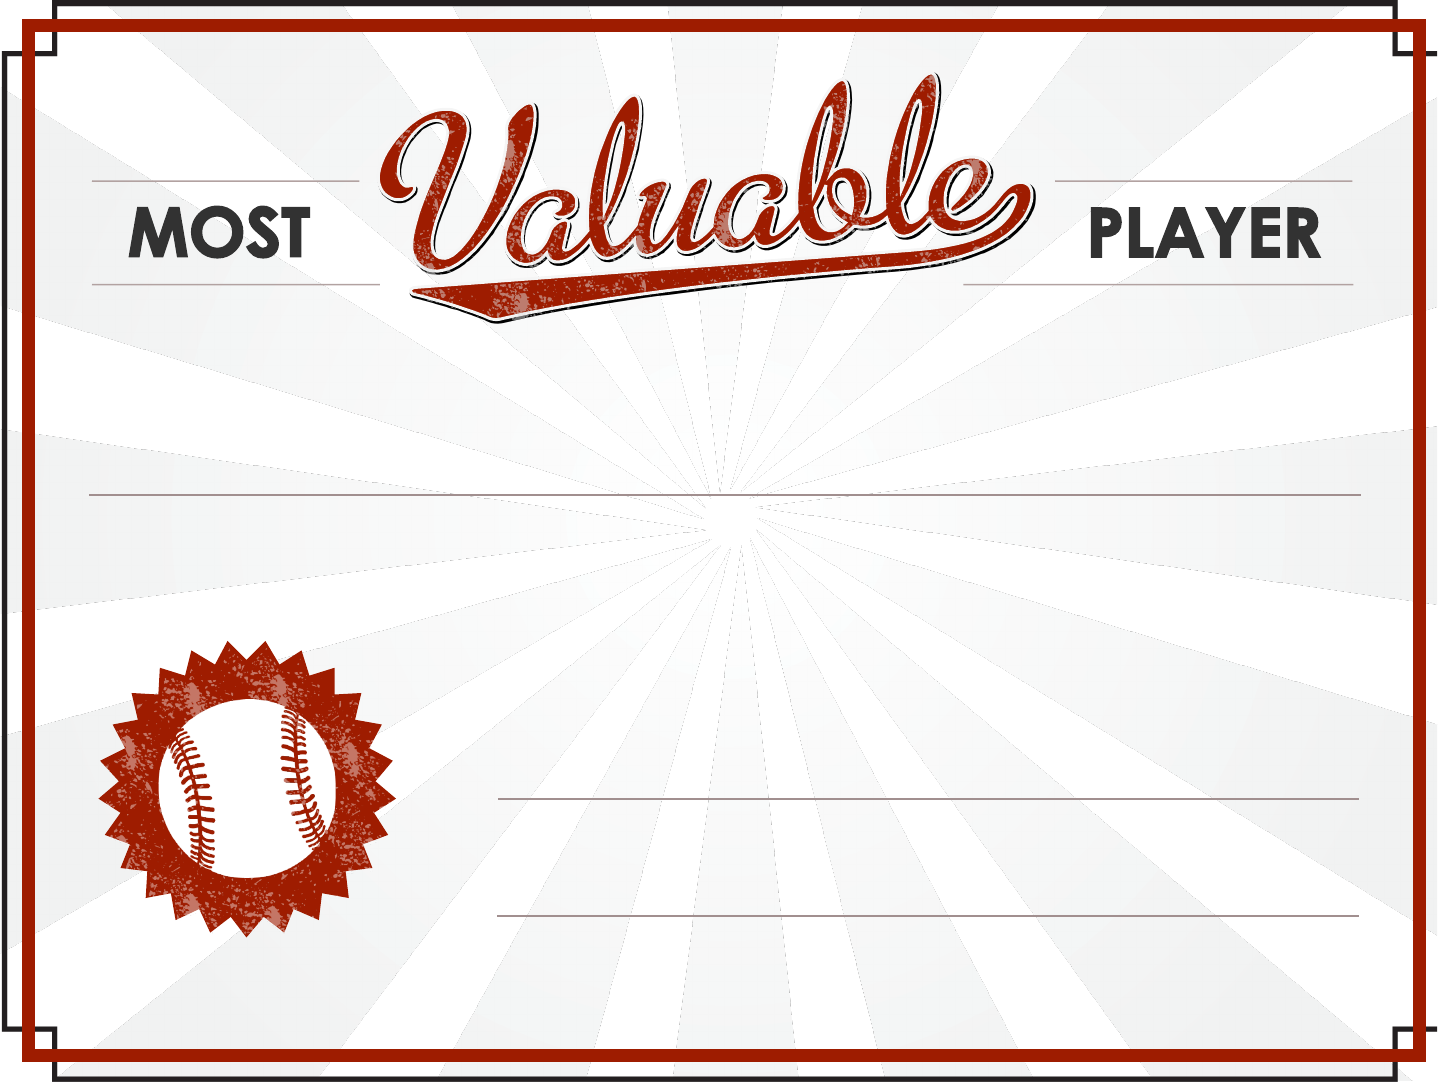 Most Valuable Player Award Certificate